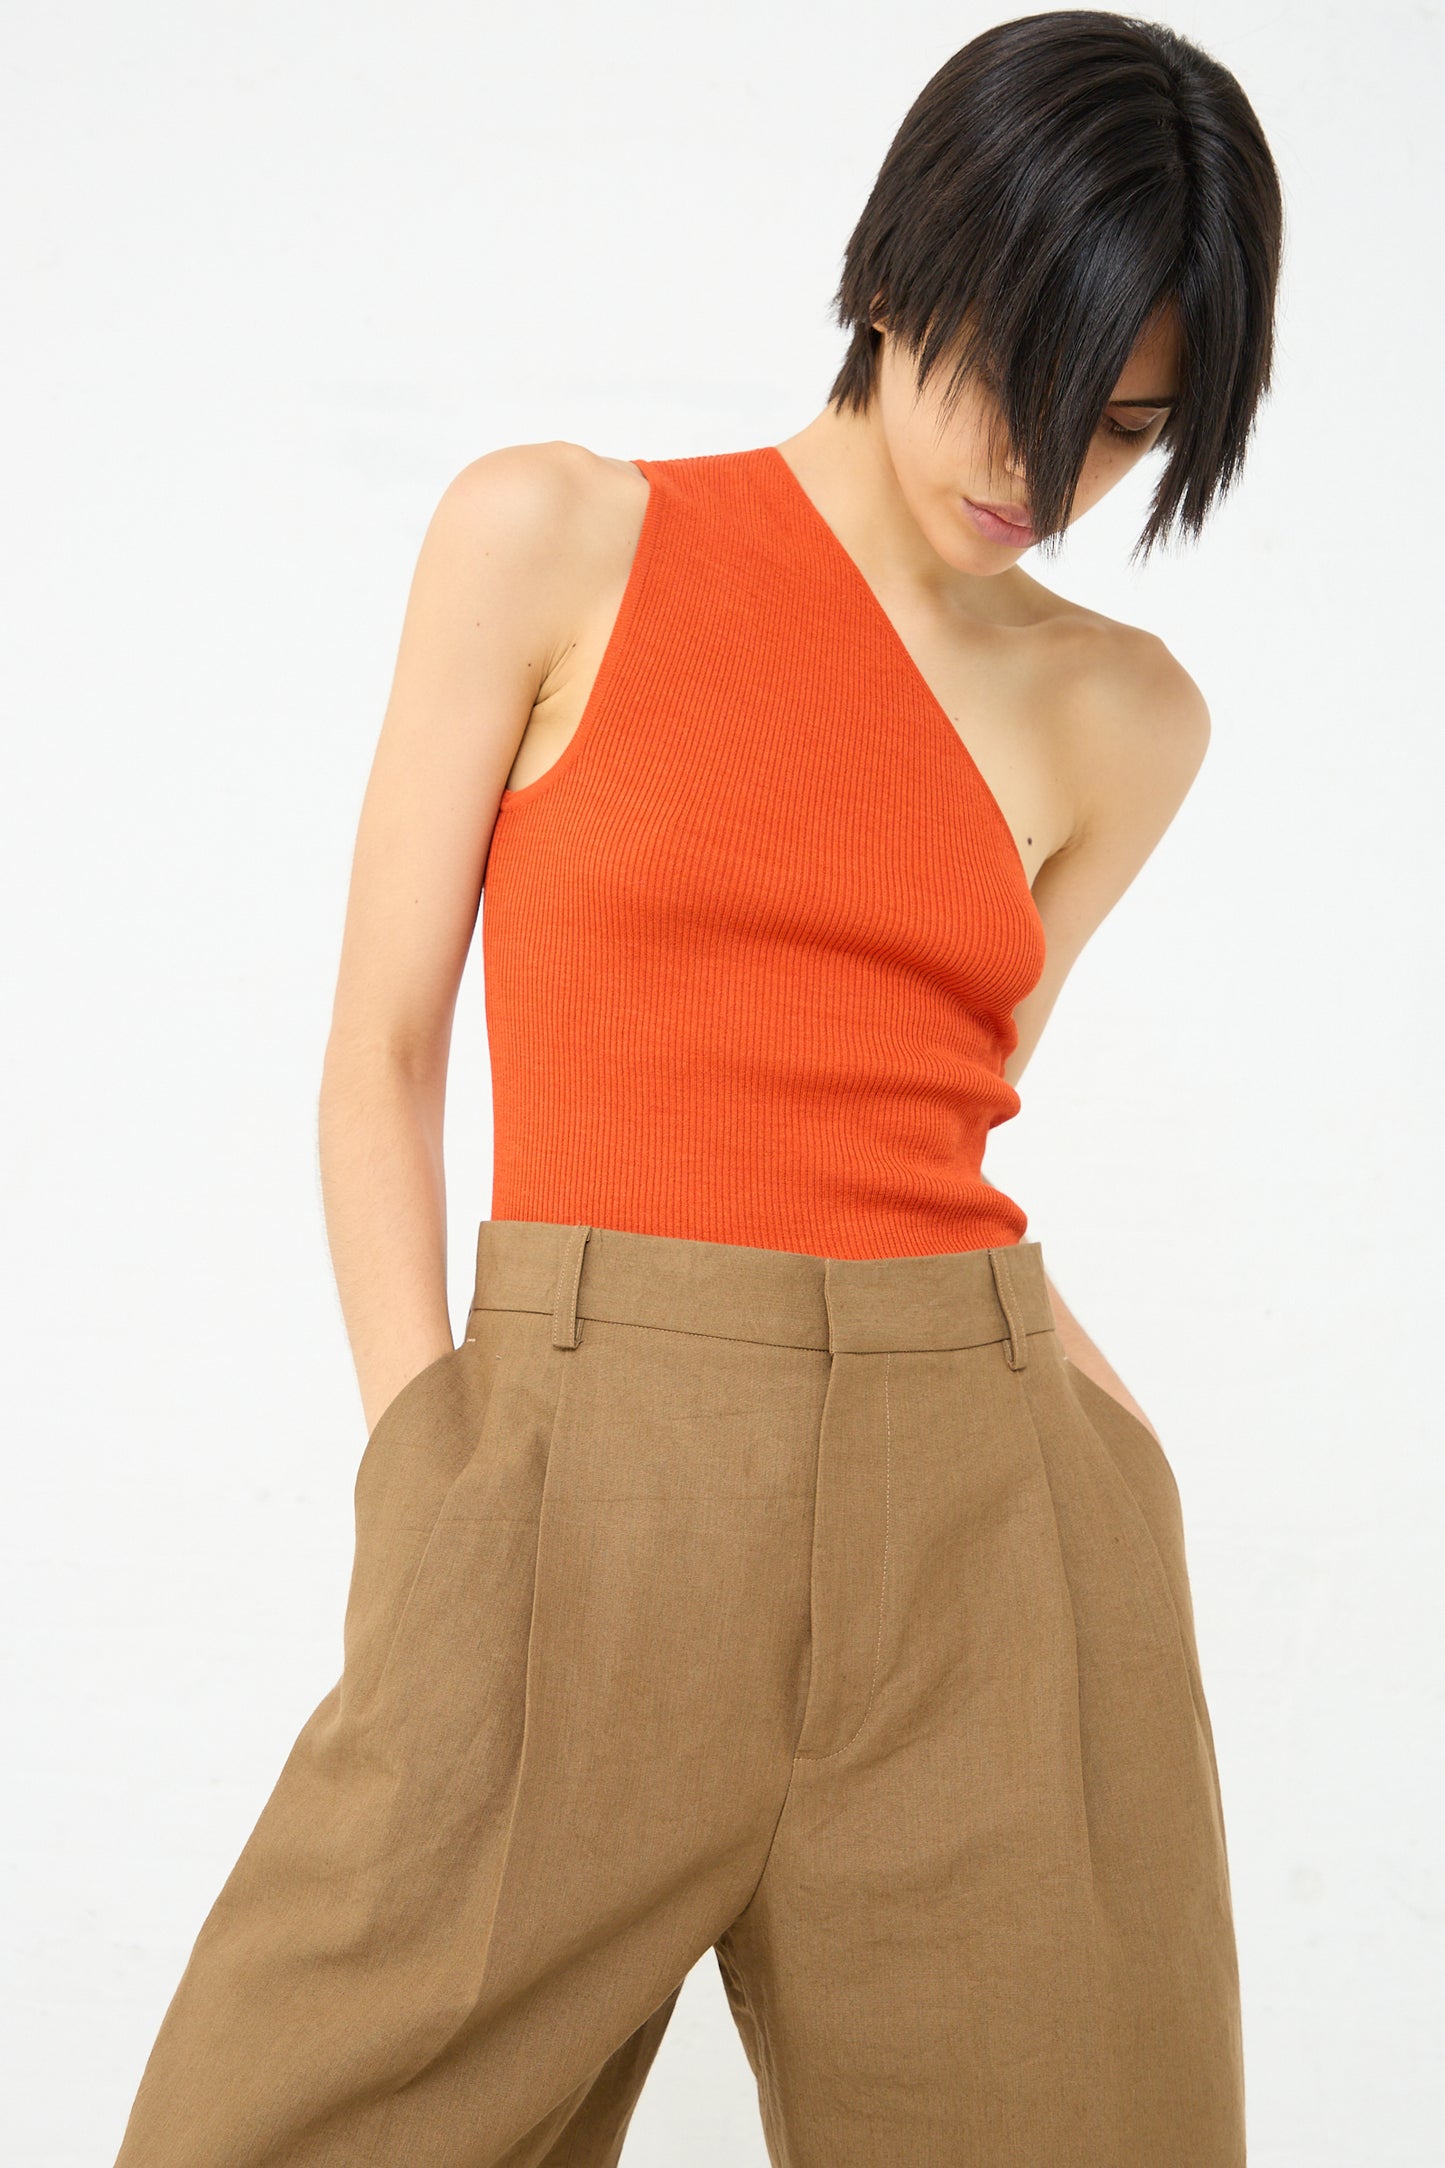 A woman in a Cristaseya Ribbed Silk Asymmetrical Top in Orange with a one-shoulder design and tan pants.